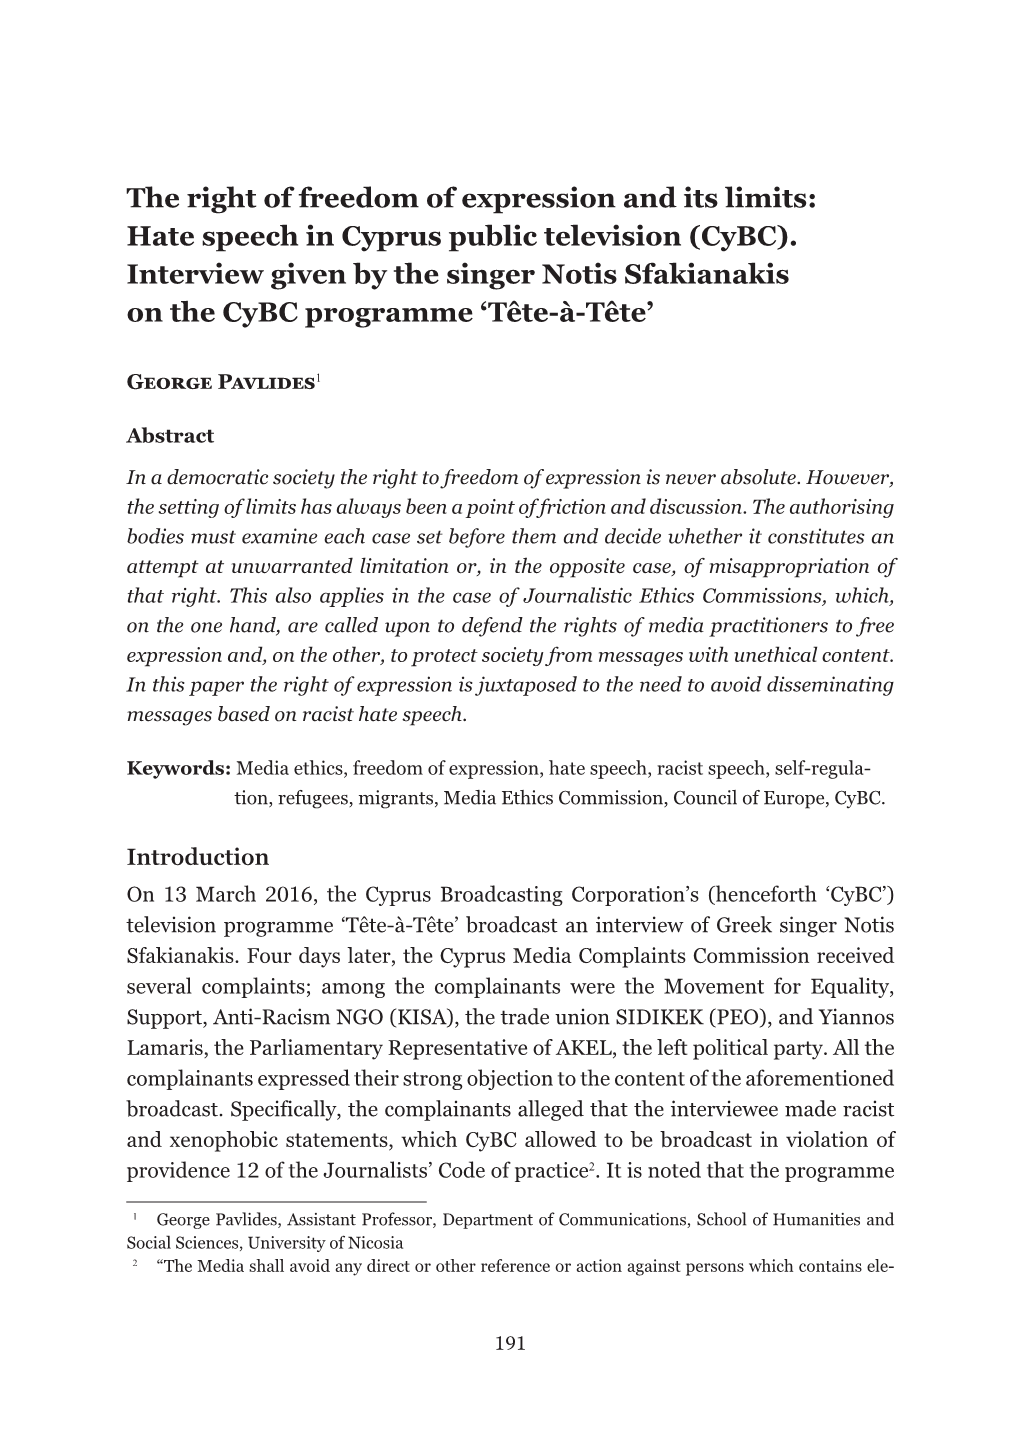 Hate Speech in Cyprus Public Television (Cybc)